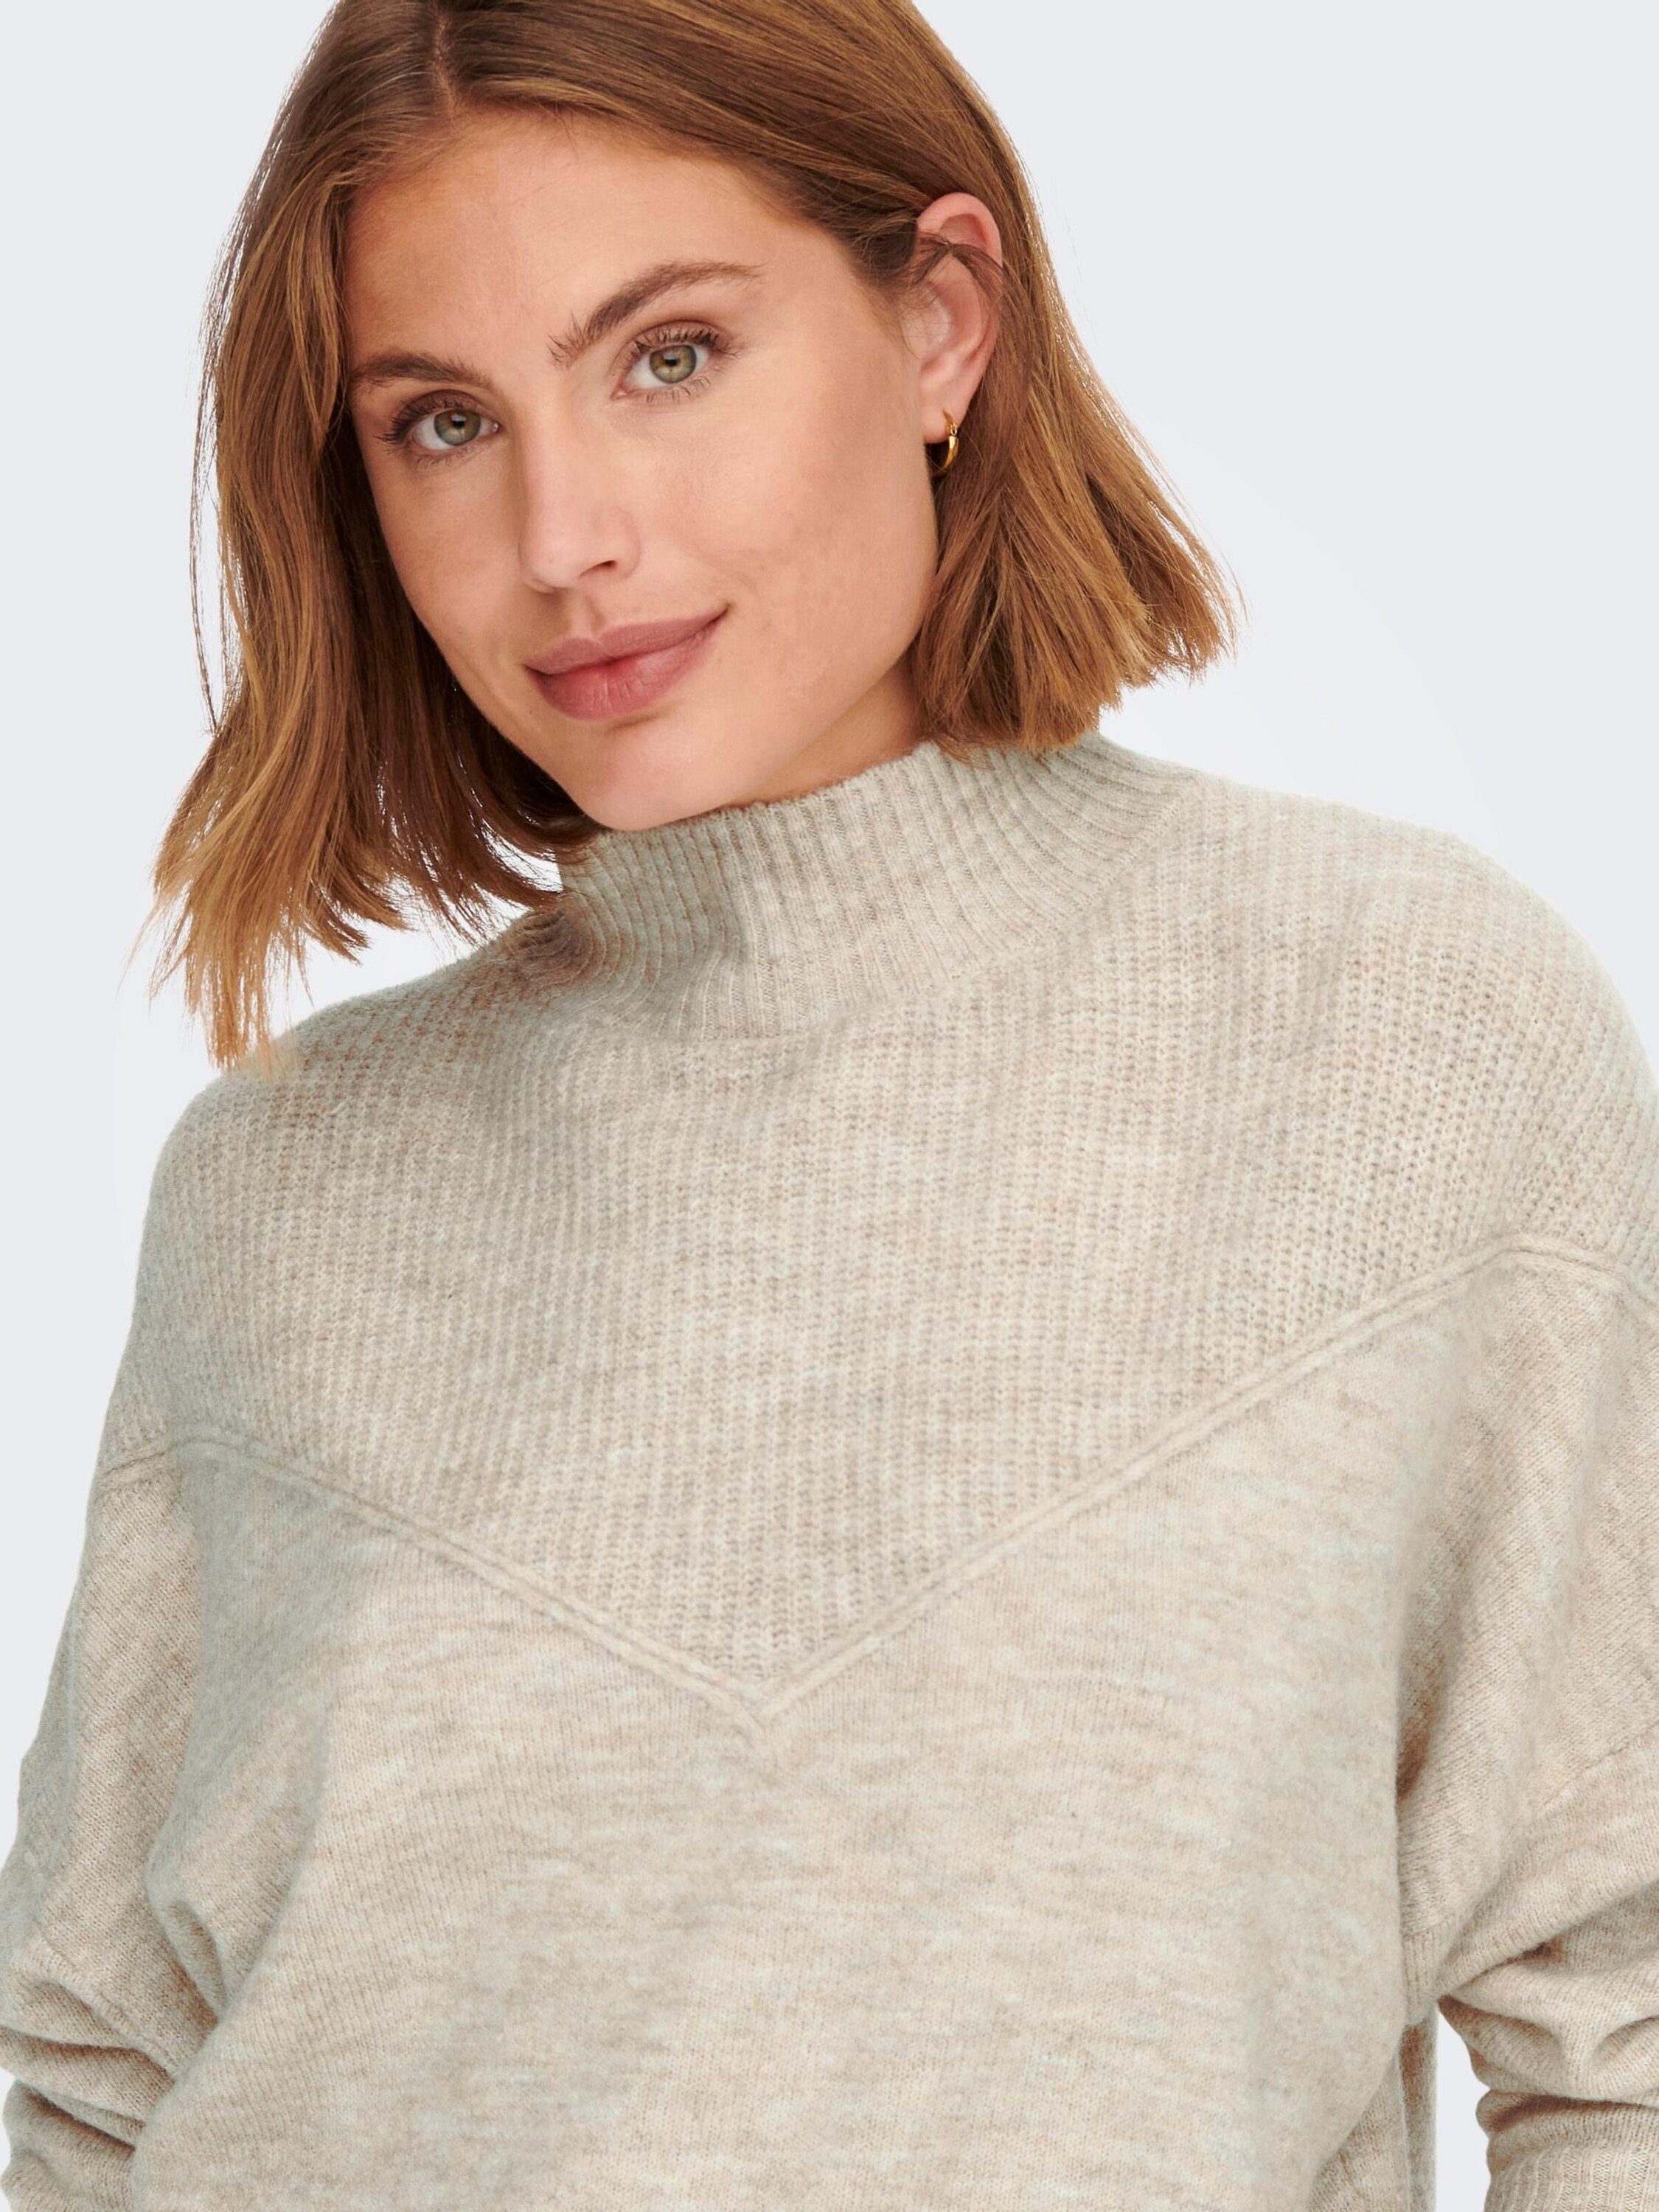 Pumice Stone Plain/ohne Strickpullover ONLY (1-tlg) Details